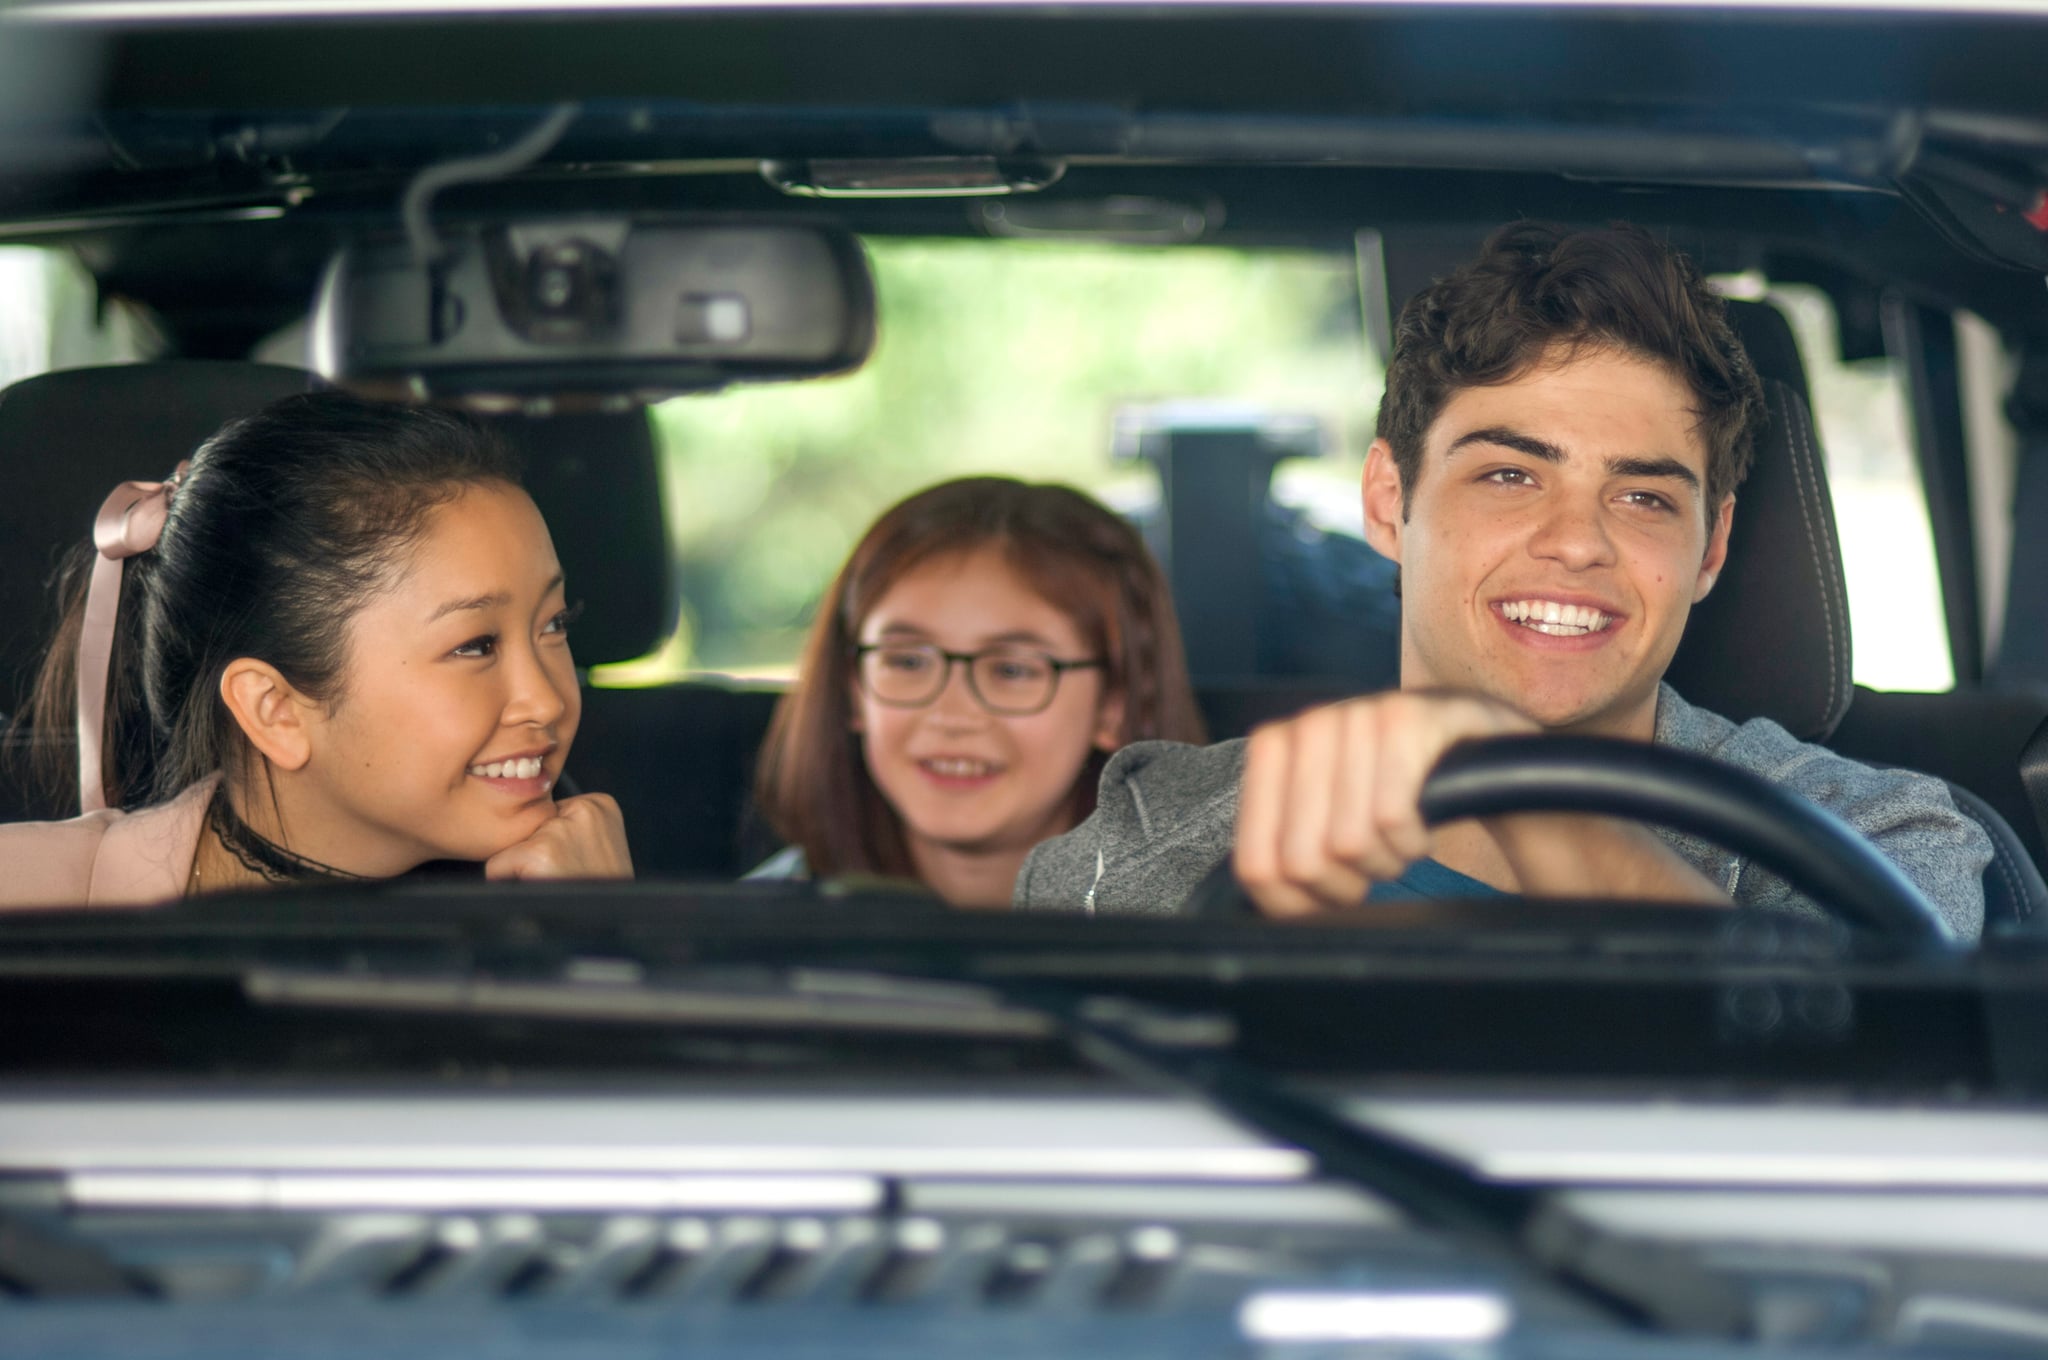 TO ALL THE BOYS I'VE LOVED BEFORE, from left: Lana Condor, Anna Cathcart, Noah Centineo, 2018.  Netflix /Courtesy Everett Collection